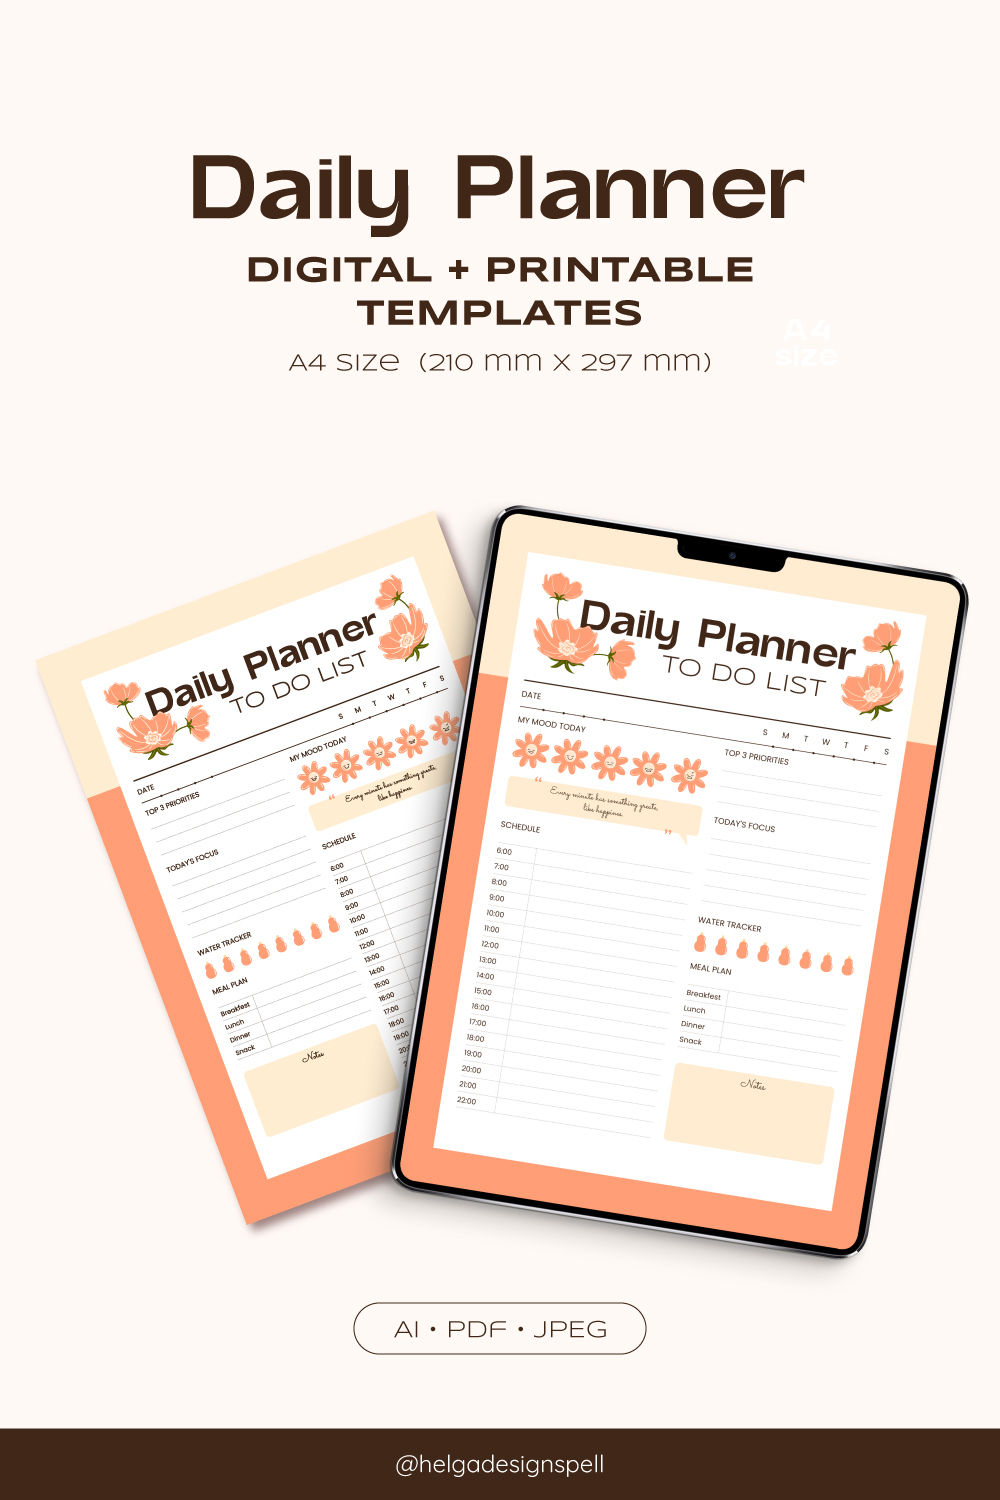 Personal Daily Planner, digital & printable pinterest preview image.